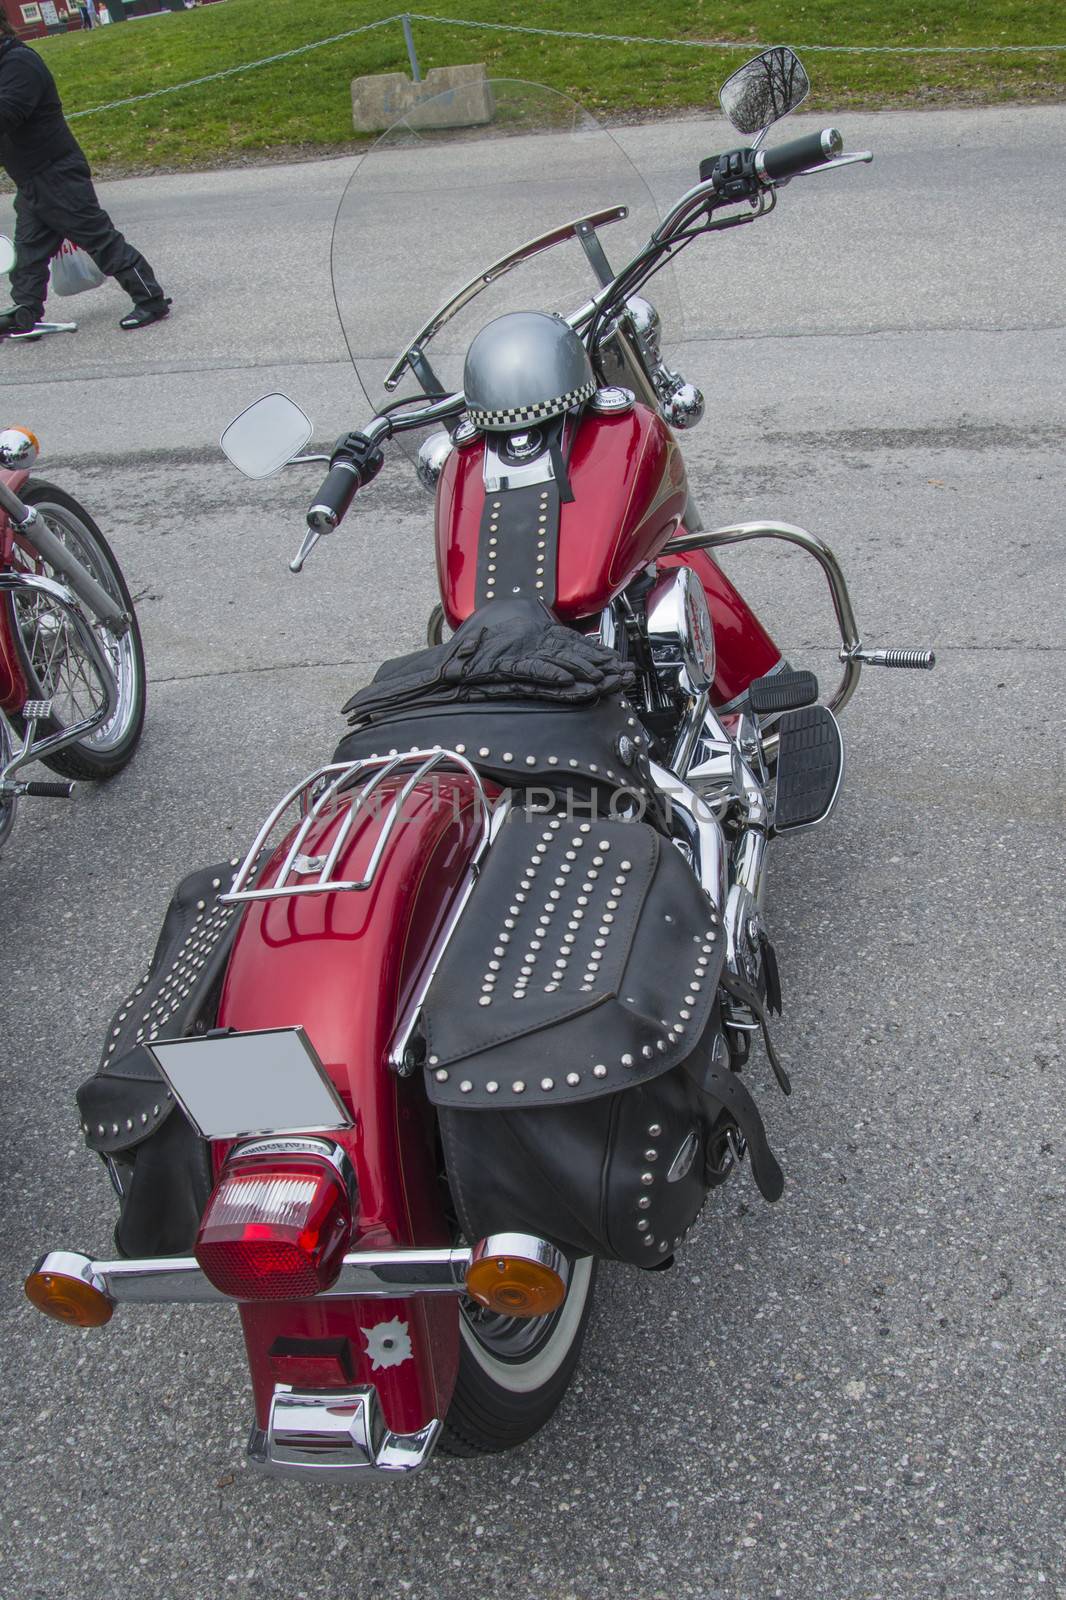 Every year in May there is a motorcycle meeting at Fredriksten fortress in Halden, Norway. In this photo Harley Davidson.